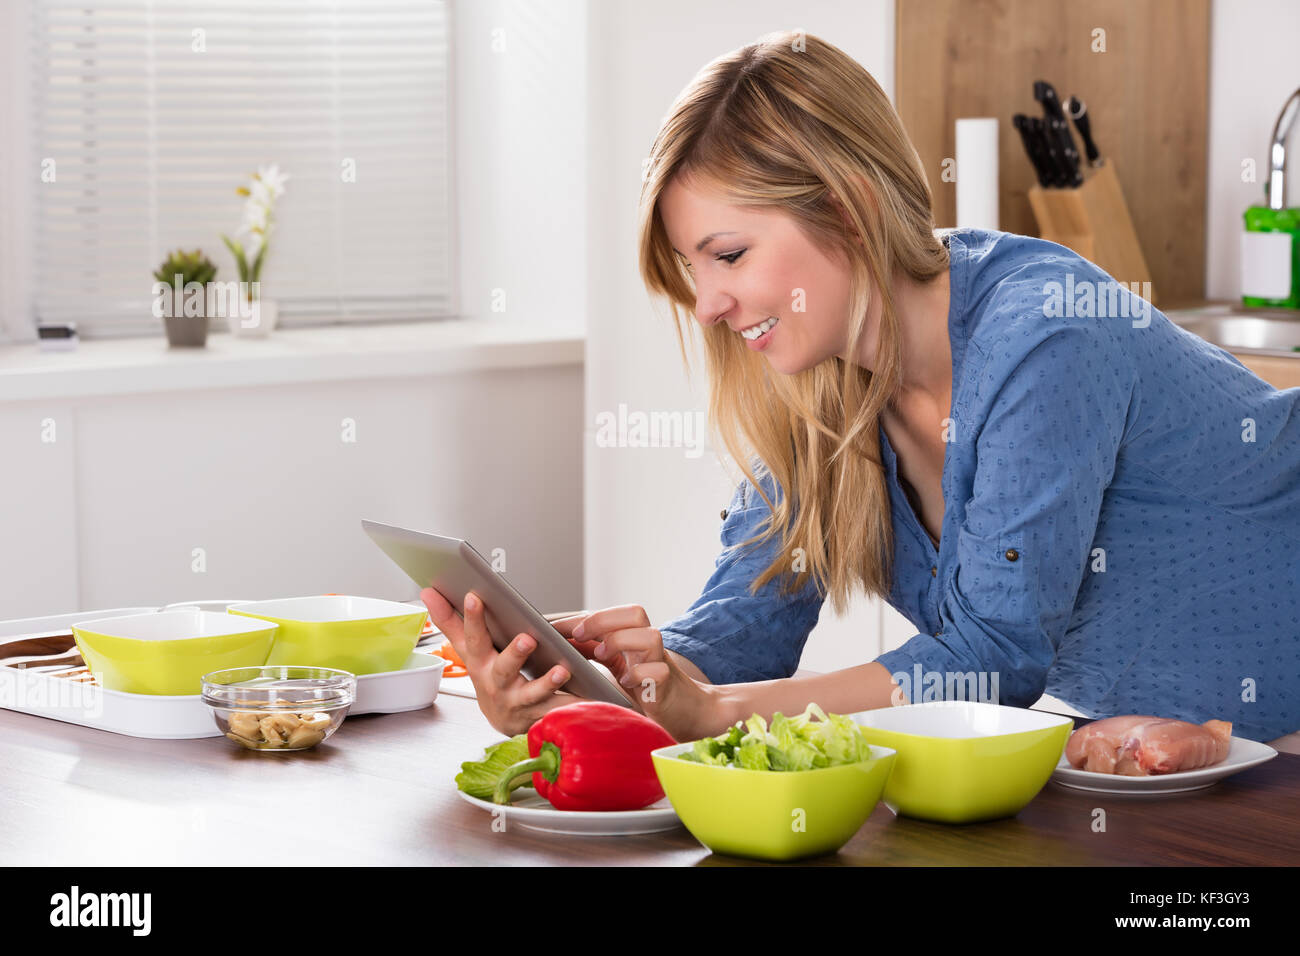 Smiling Young Woman Using Digital Tablet With Vegetable On Countertop In Kitchen Stock Photo